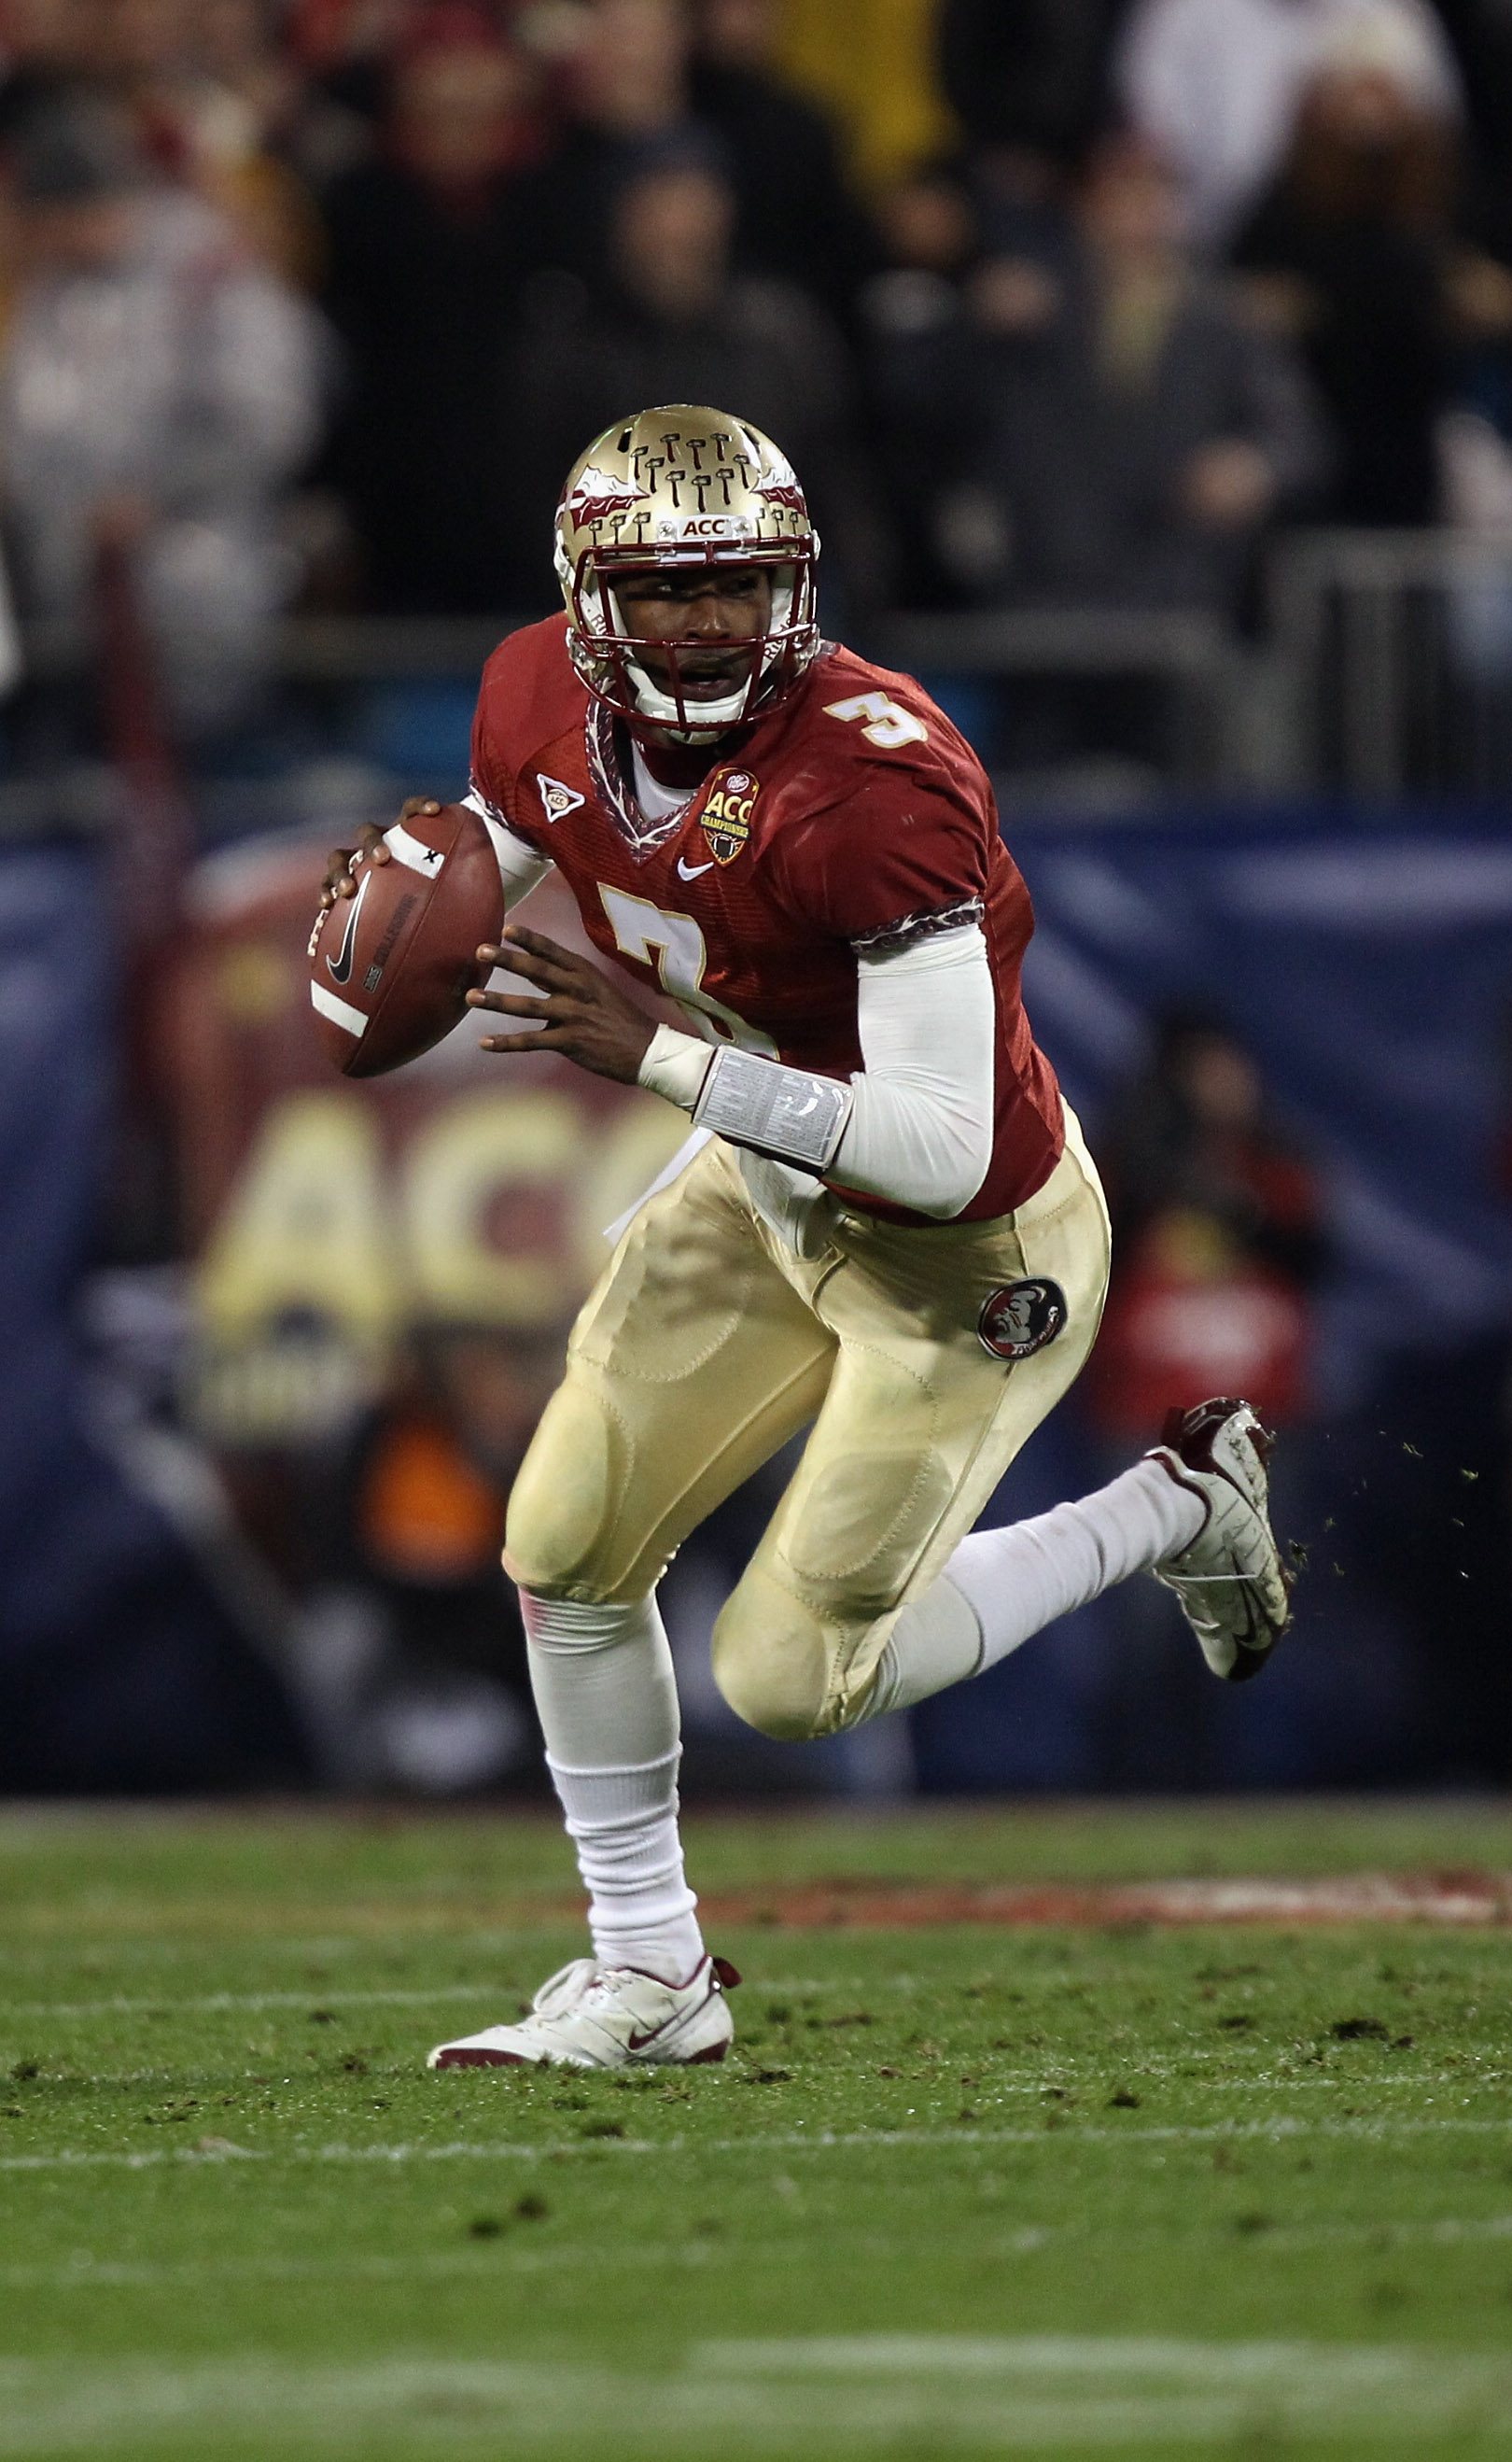 CHARLOTTE, NC - DECEMBER 04:  EJ Manuel #3 of the Florida State Seminoles against the Virginia Tech Hokies during their game at Bank of America Stadium on December 4, 2010 in Charlotte, North Carolina.  (Photo by Streeter Lecka/Getty Images)